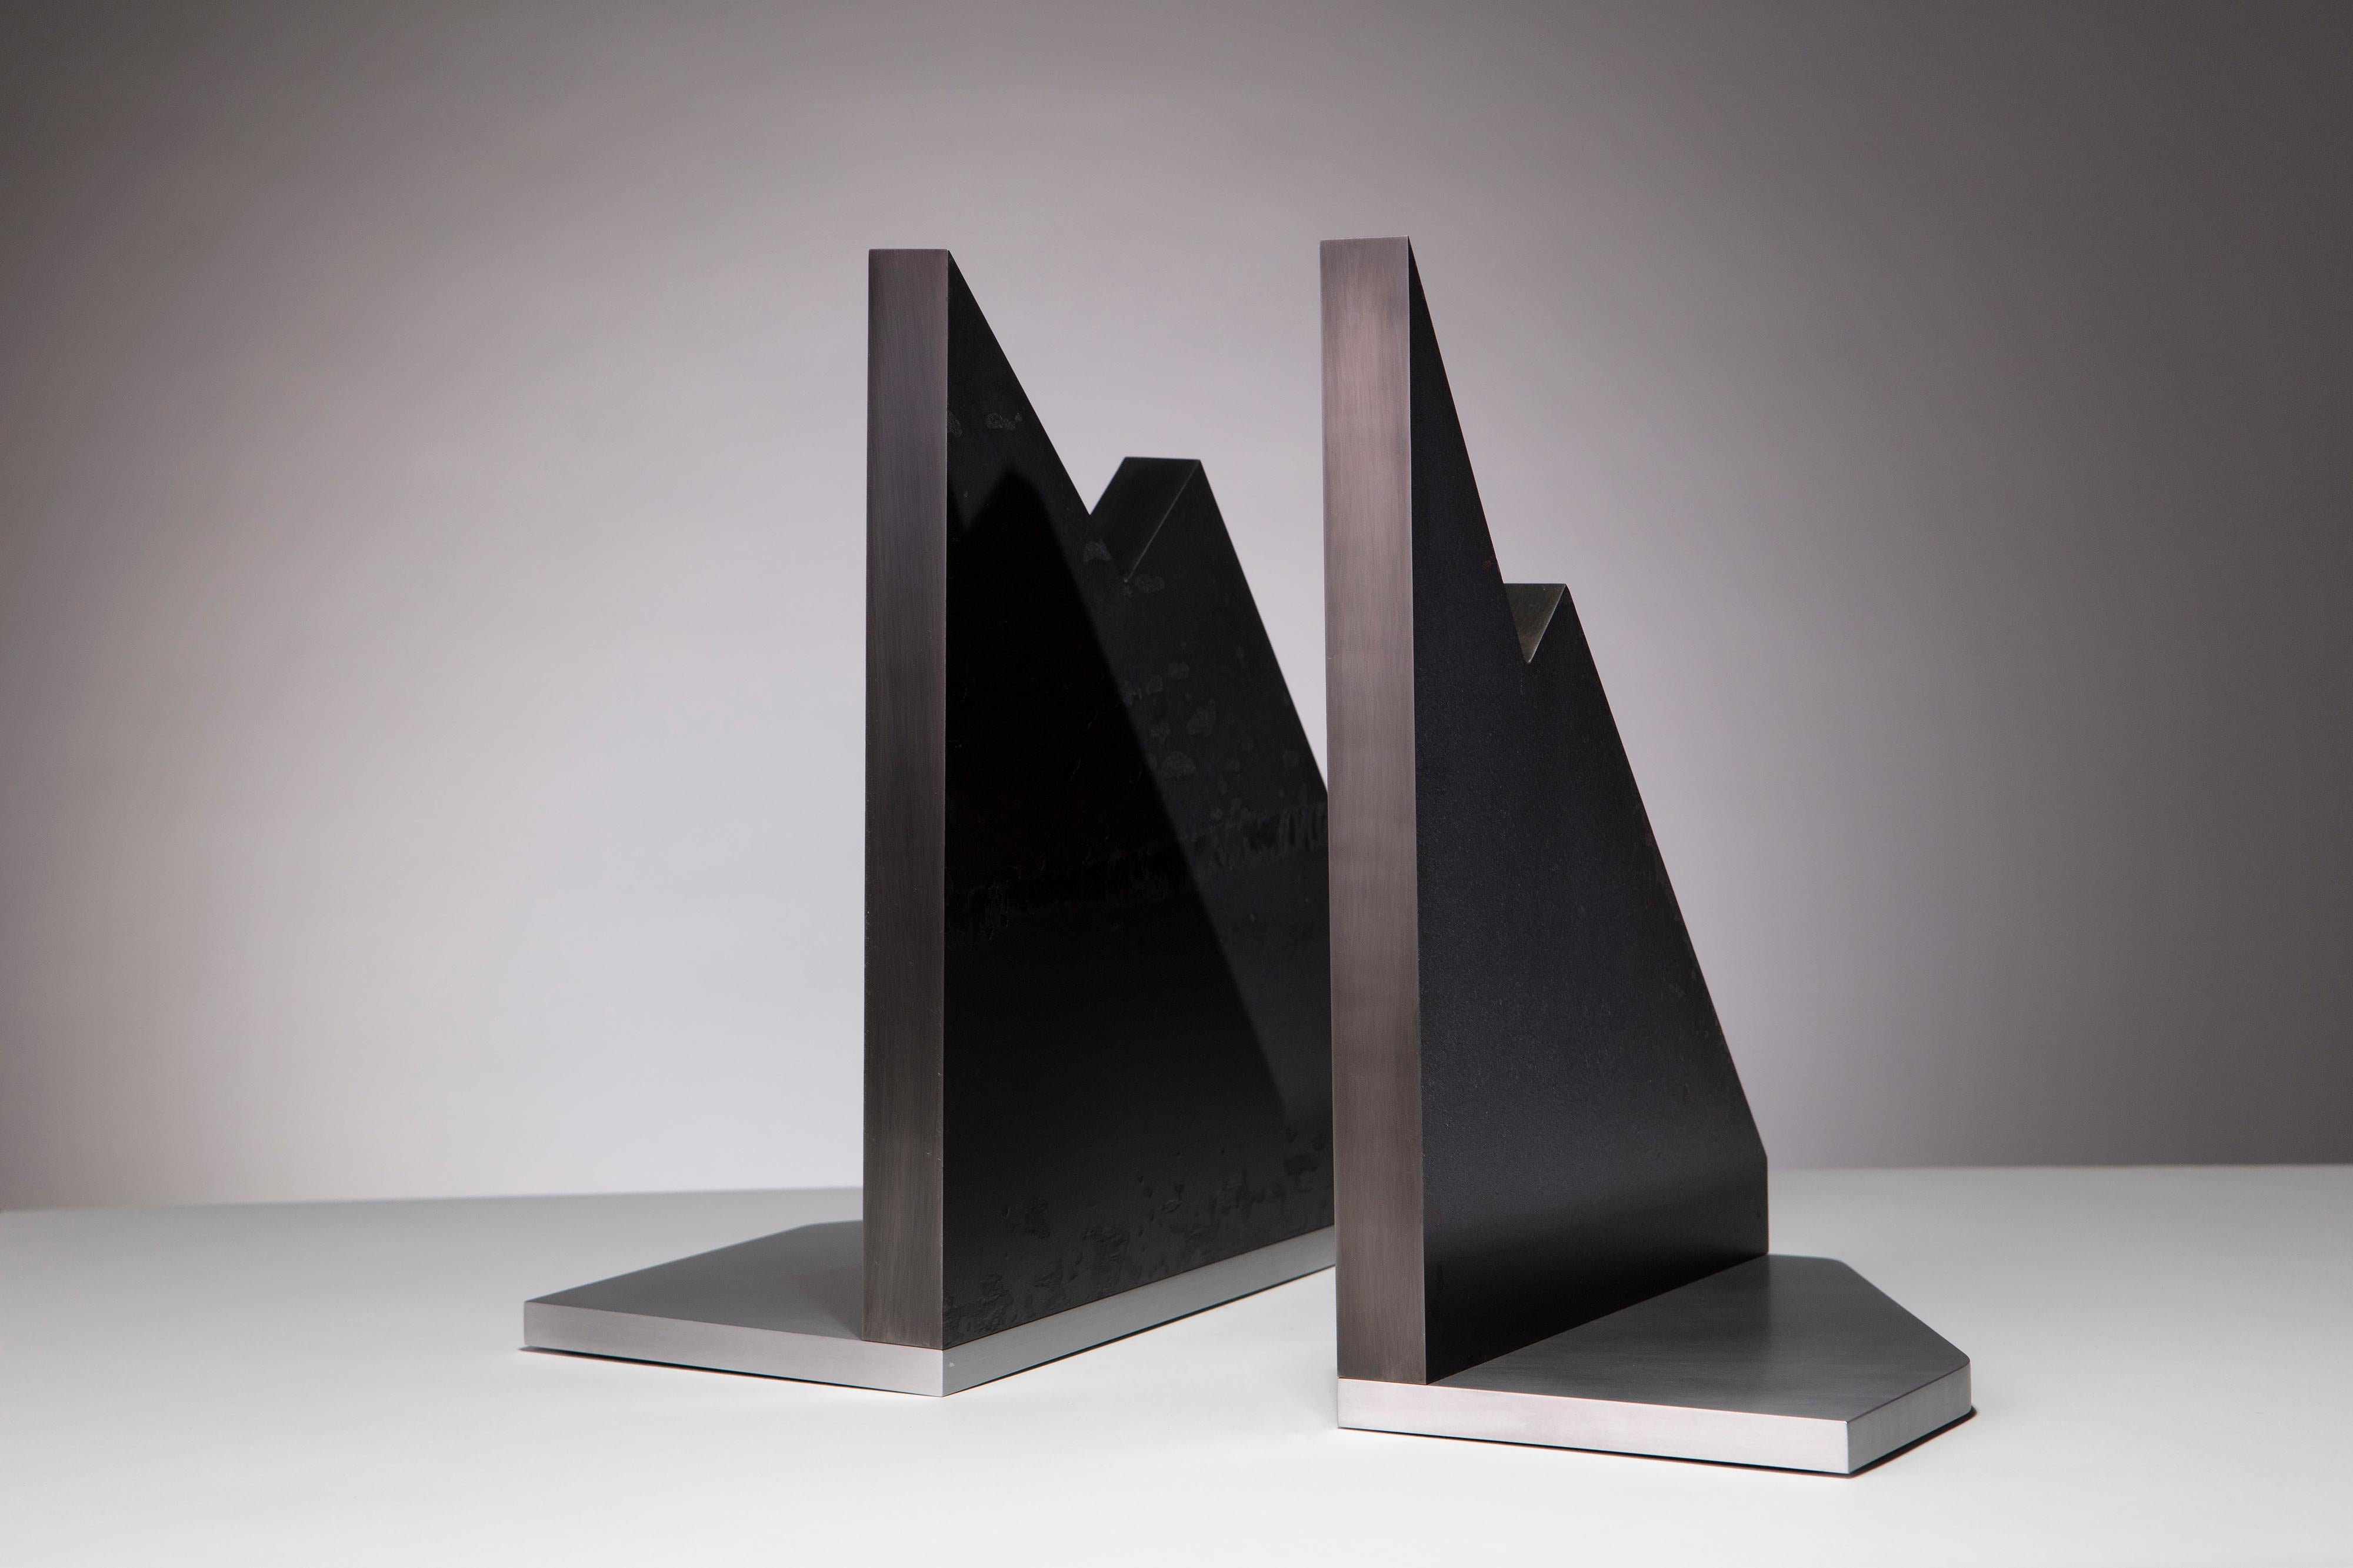 The Mountains: modern steel and aluminum sculptural bookends by Erik Johnson of APD. Solid steel plates and burnished aluminum are combined to form these bold statement pieces.

1 of 1
Stamped APD 00040

Letter of Authenticity included with the